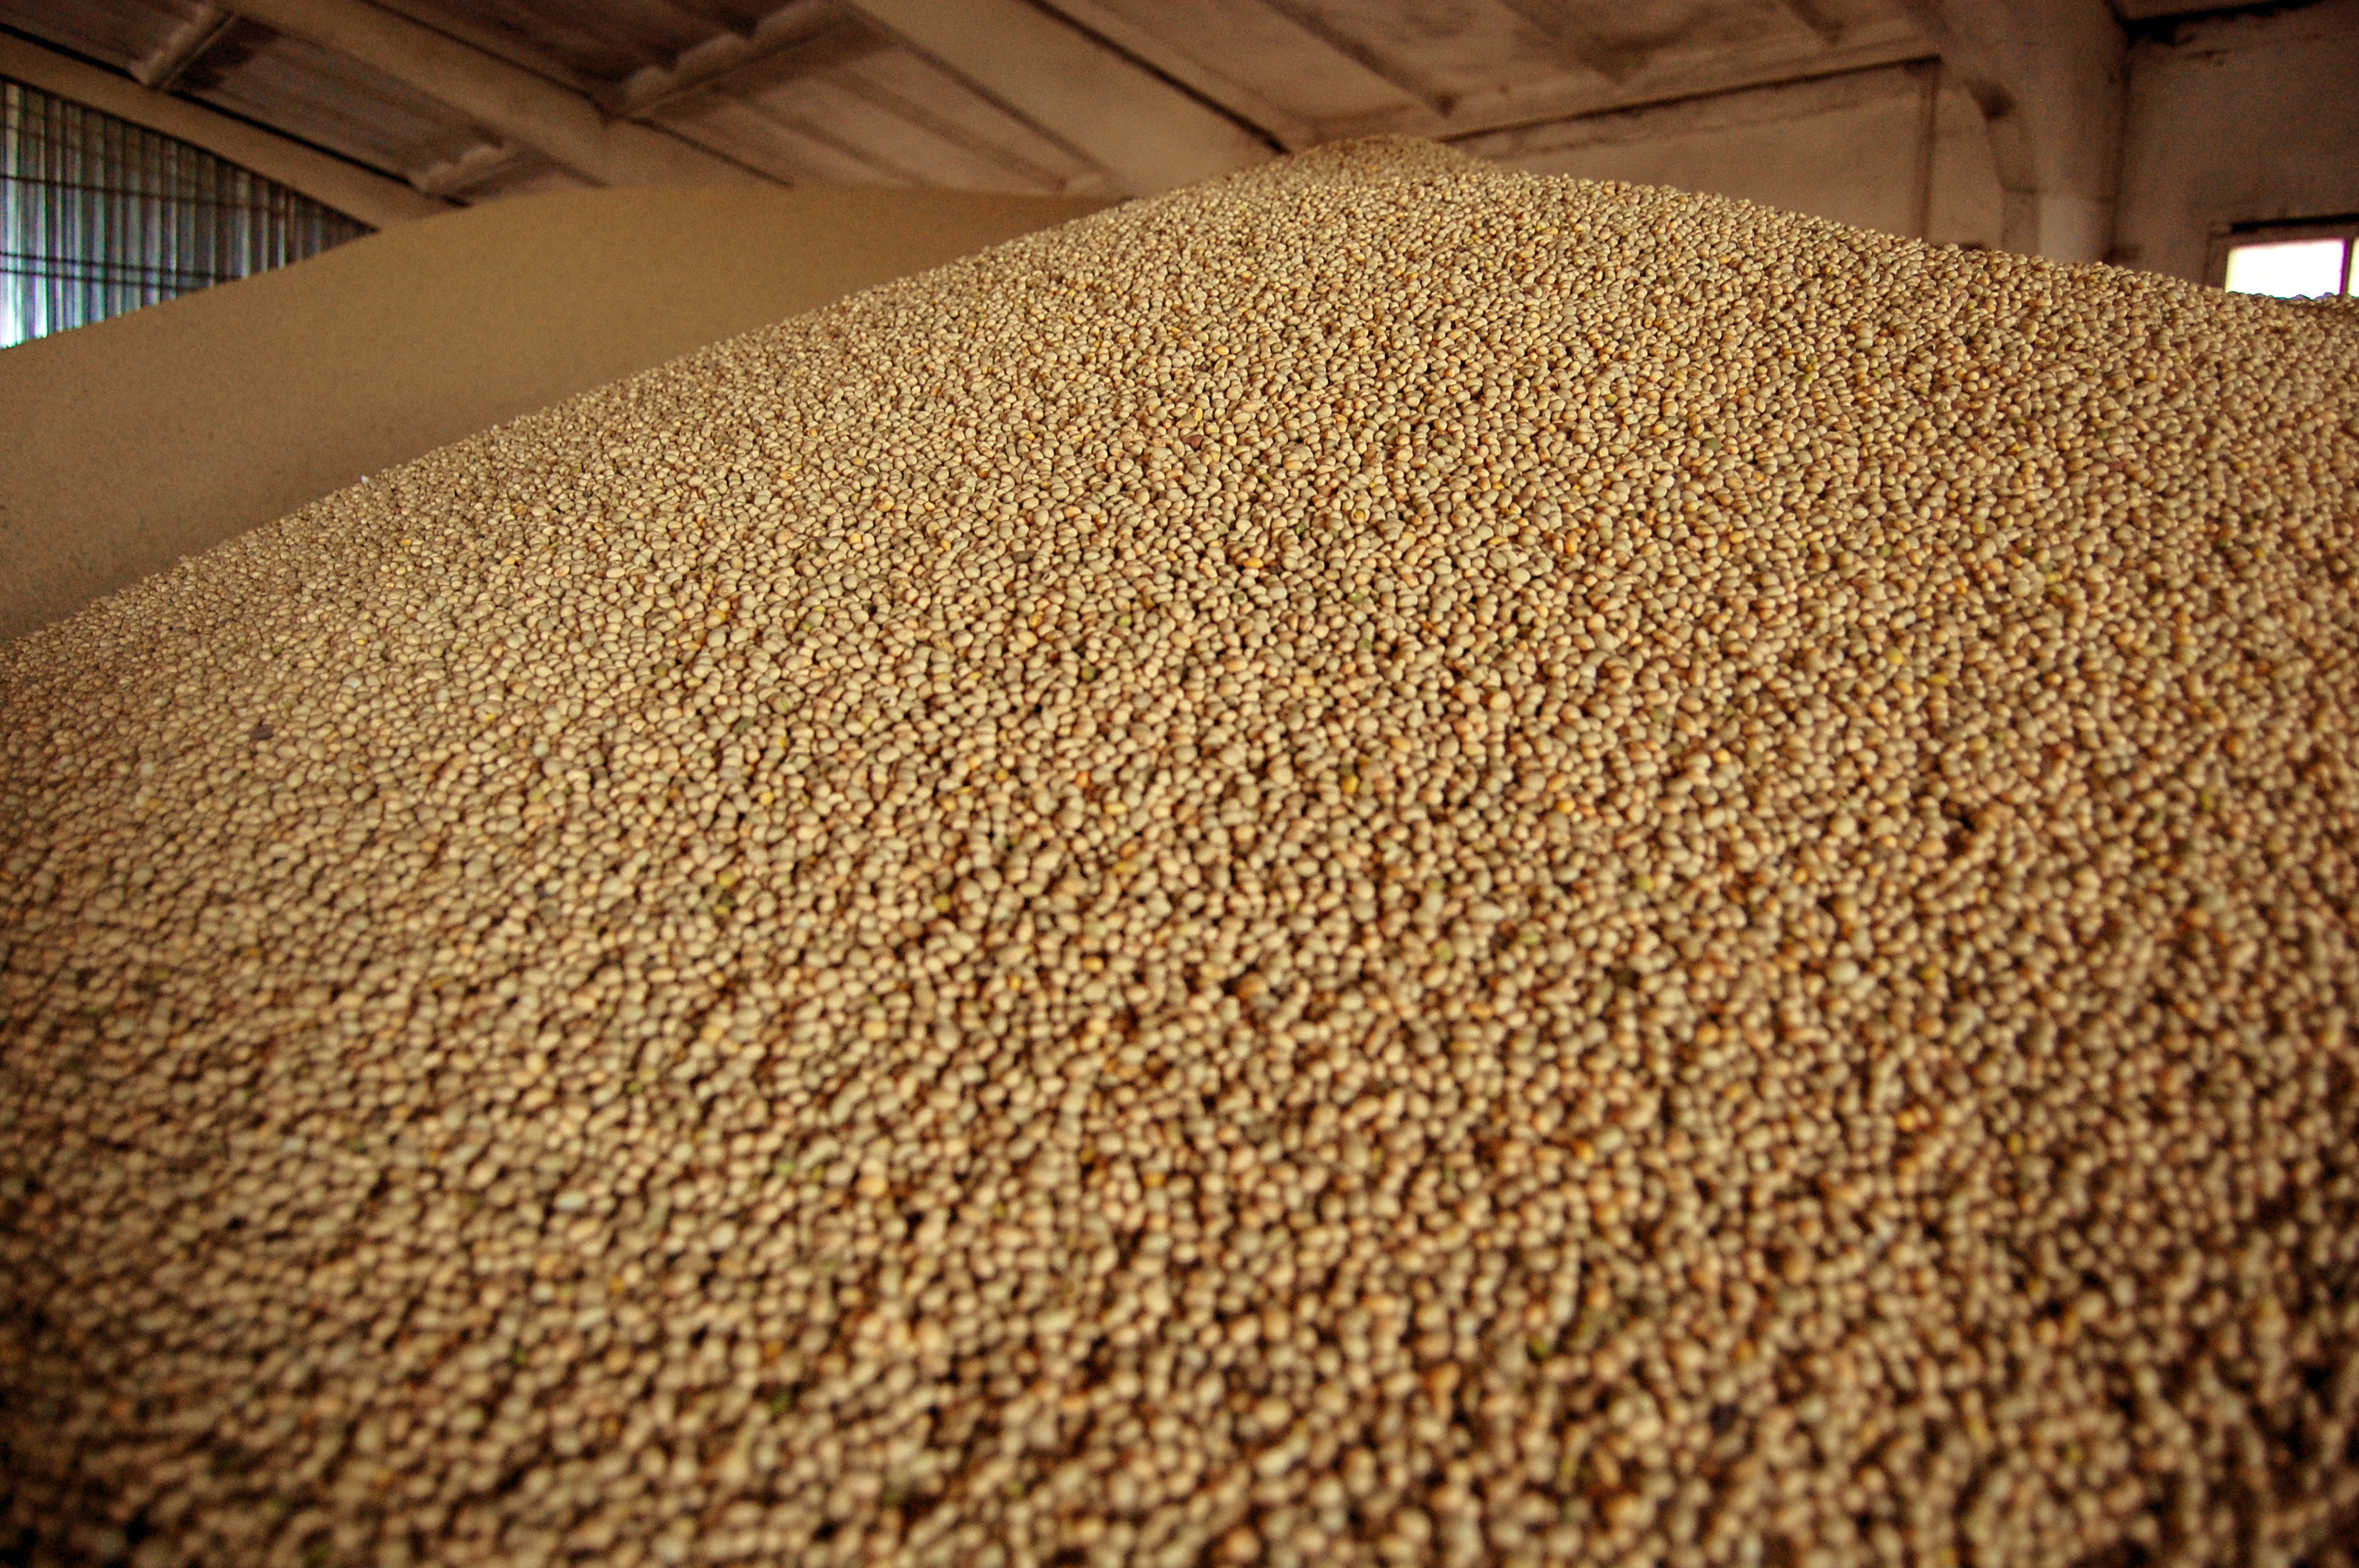 Pile of soybeans in a barn